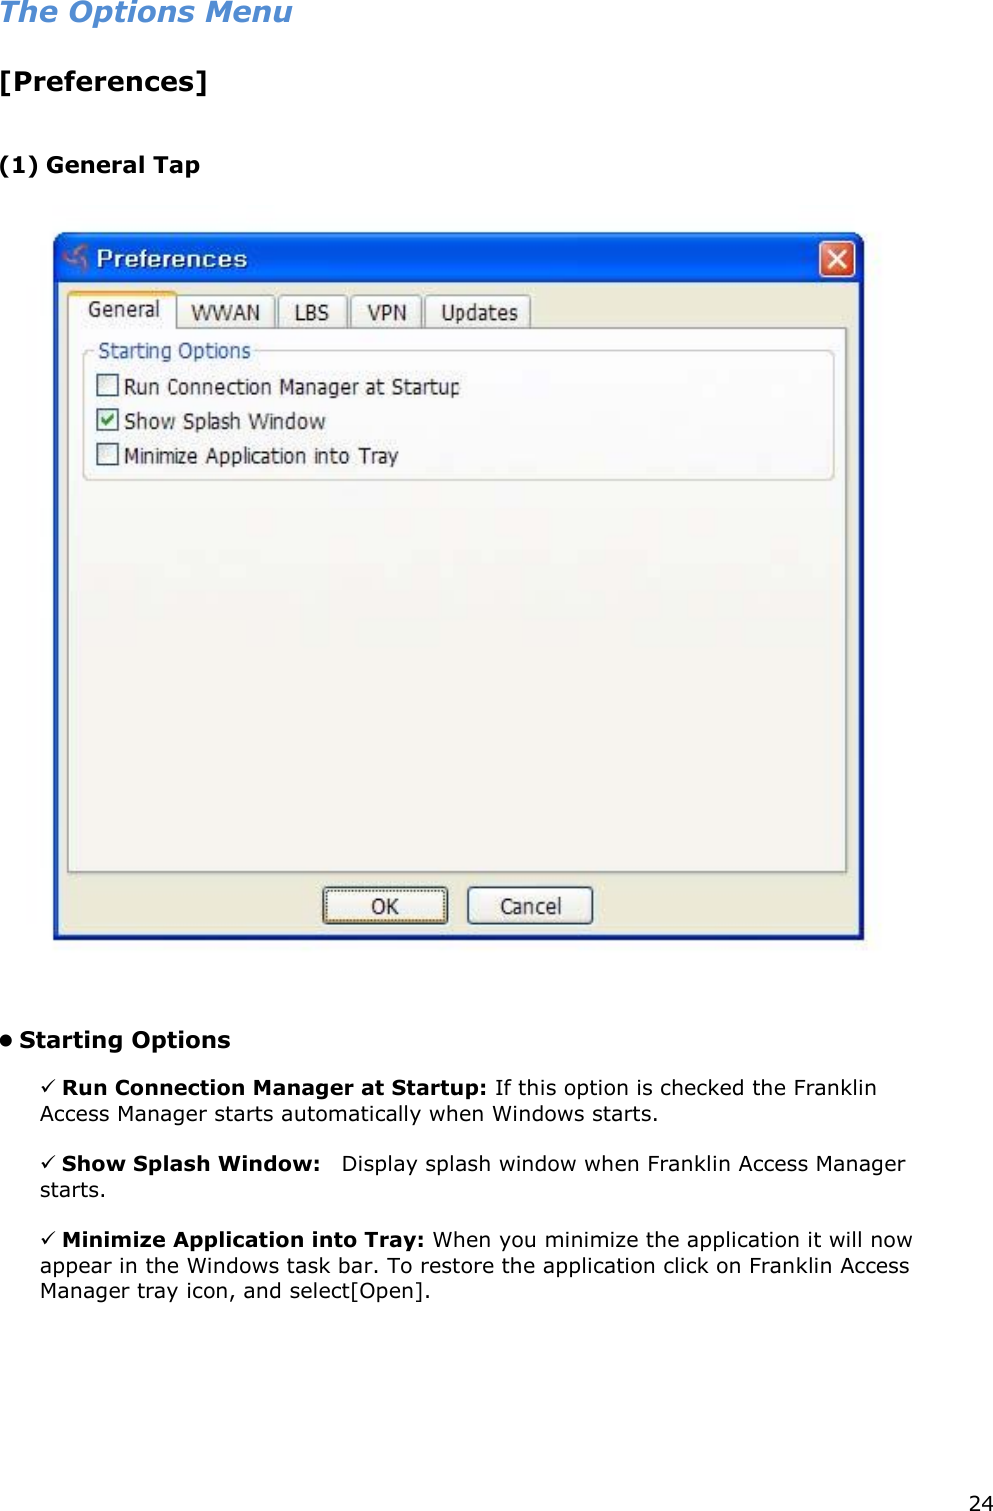 24    The Options Menu   [Preferences]      (1) General Tap        Starting Options    Run Connection Manager at Startup: If this option is checked the Franklin Access Manager starts automatically when Windows starts.     Show Splash Window:    Display splash window when Franklin Access Manager starts.    Minimize Application into Tray: When you minimize the application it will now appear in the Windows task bar. To restore the application click on Franklin Access Manager tray icon, and select[Open].         